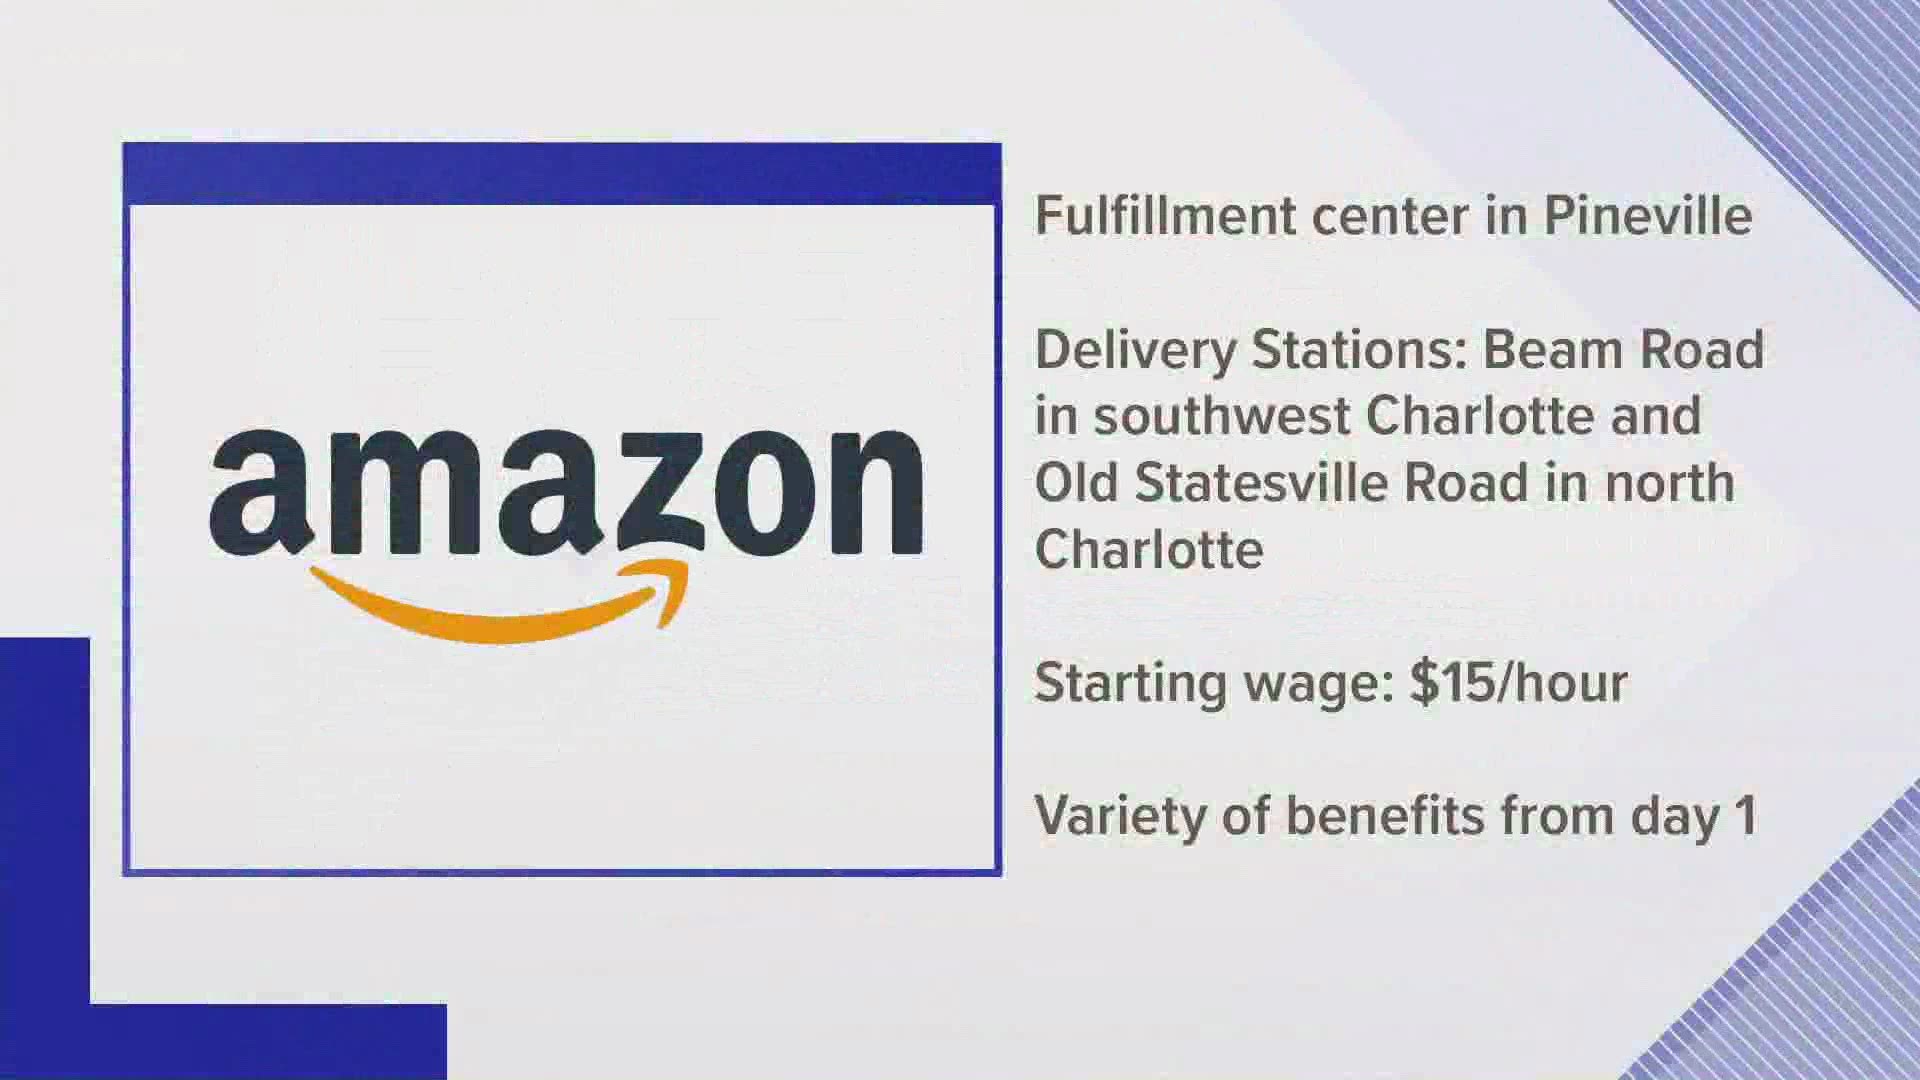 Amazon announced it will open a new fulfillment center and two new delivery stations in the Charlotte area -- creating hundreds of new full-time jobs.